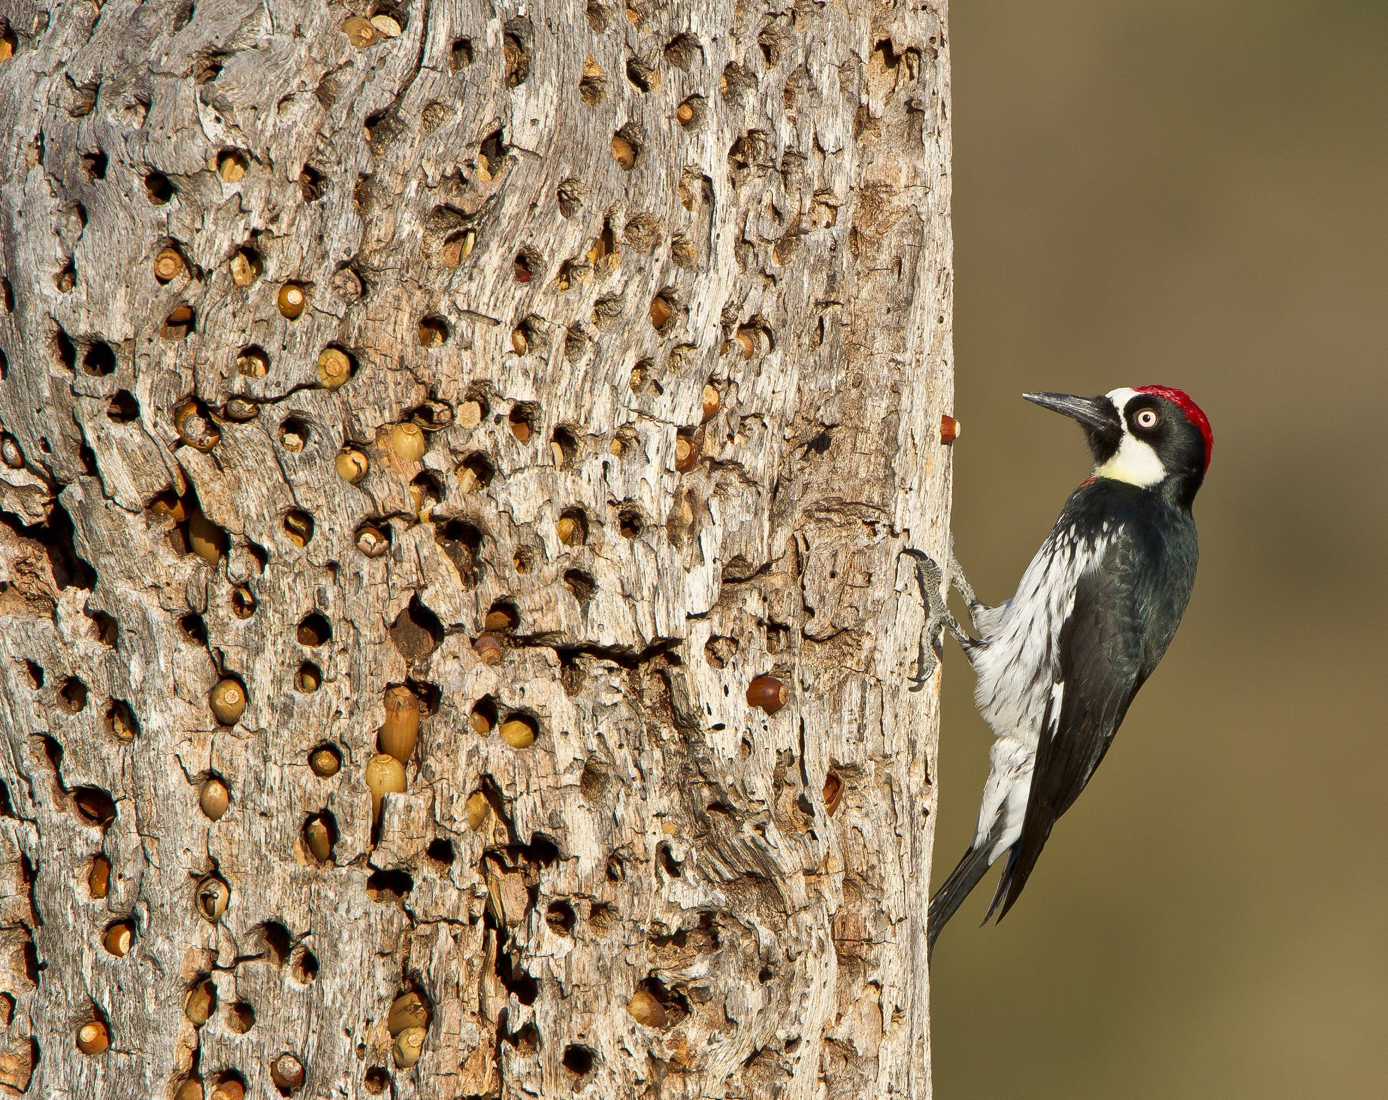 You are currently viewing Polygamy is just one reason why acorn woodpeckers are master survivalists